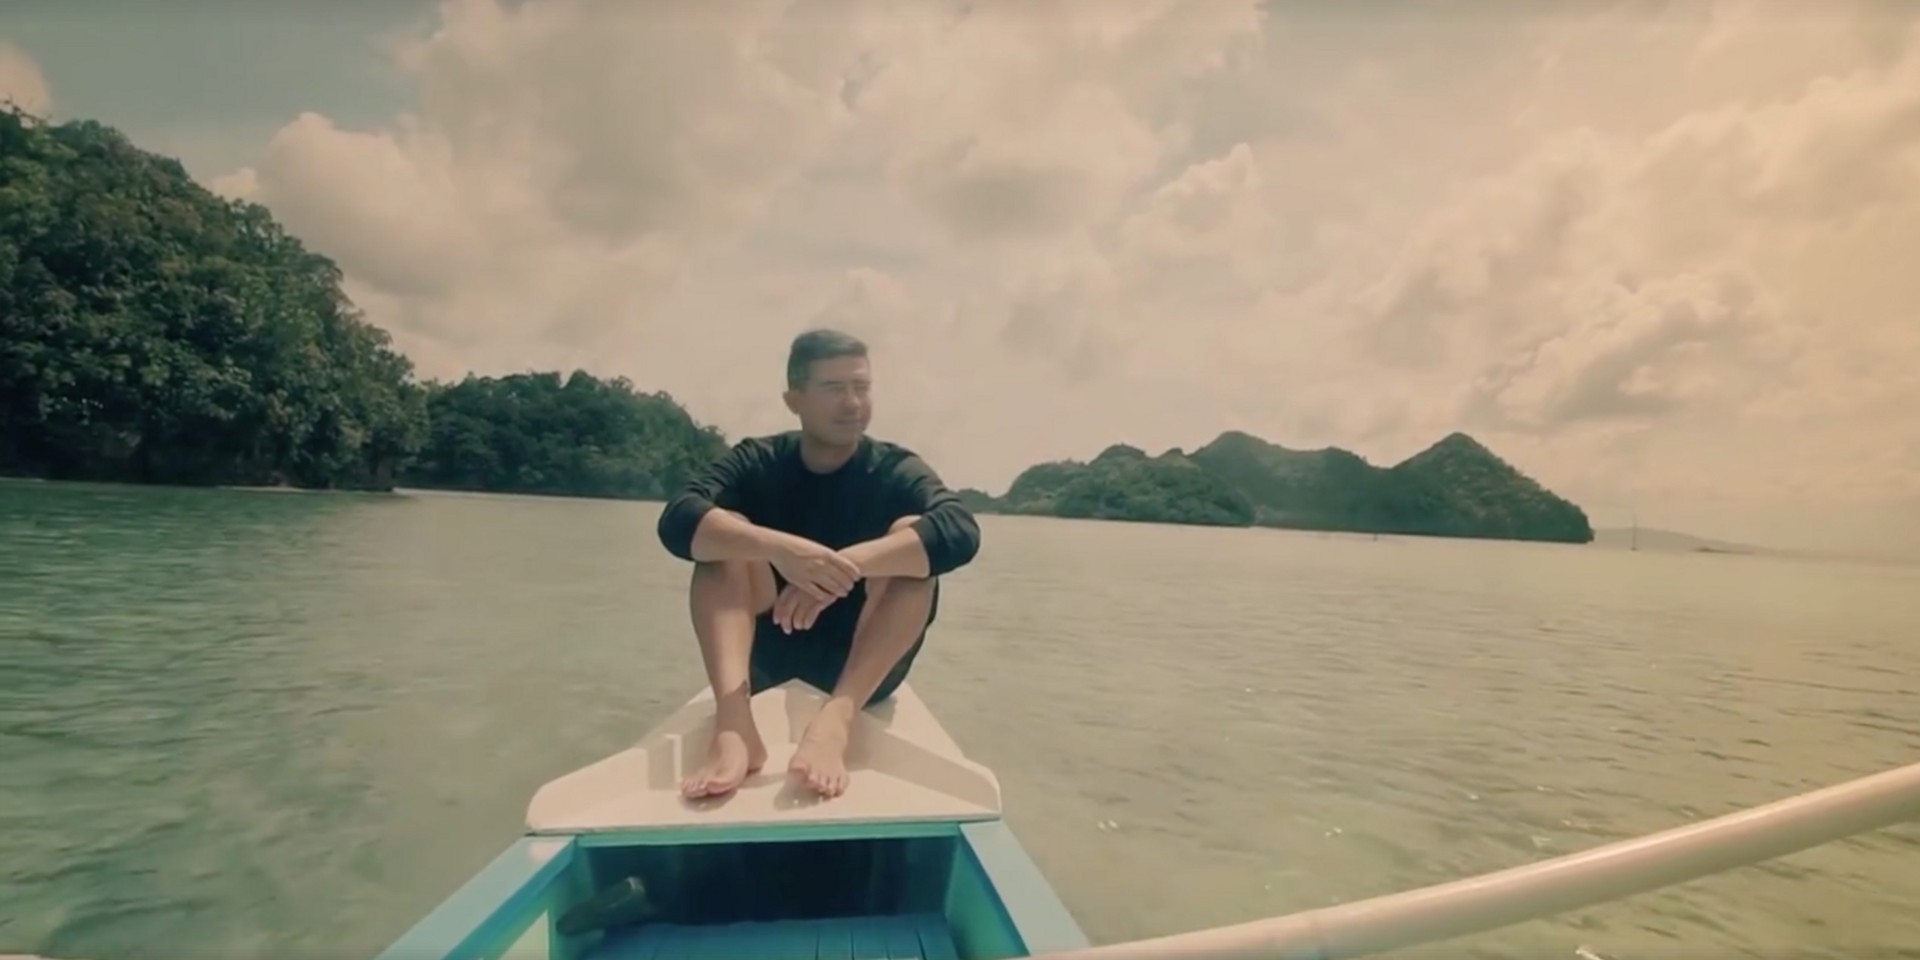 Hale releases new music video 'Alon' for Siargao soundtrack